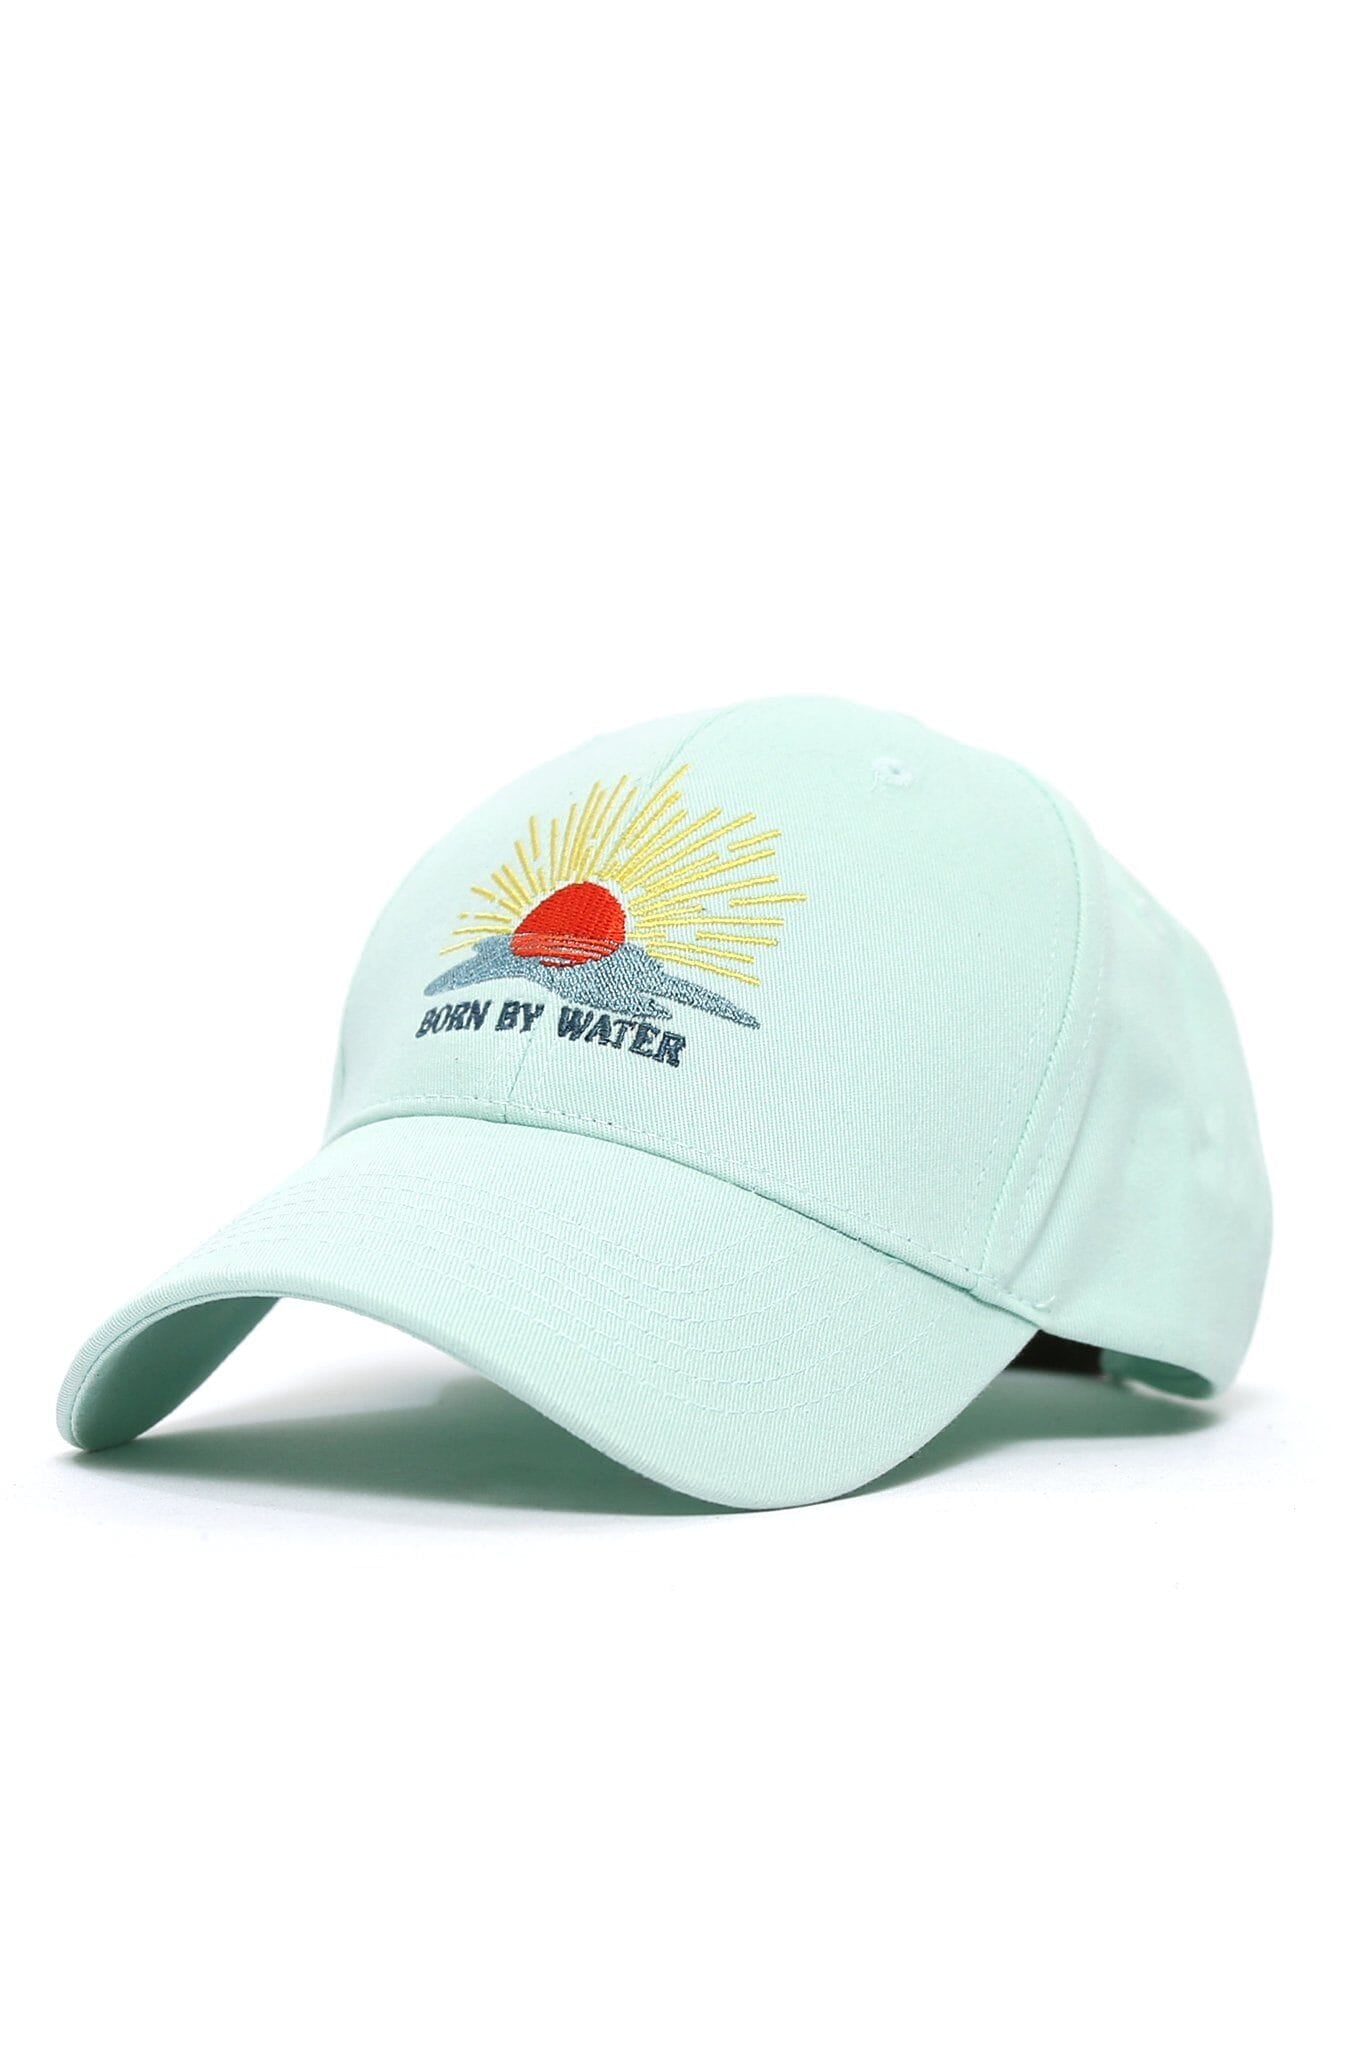 BORN BY WATER SUNSET CAP - G-GREEN - OS